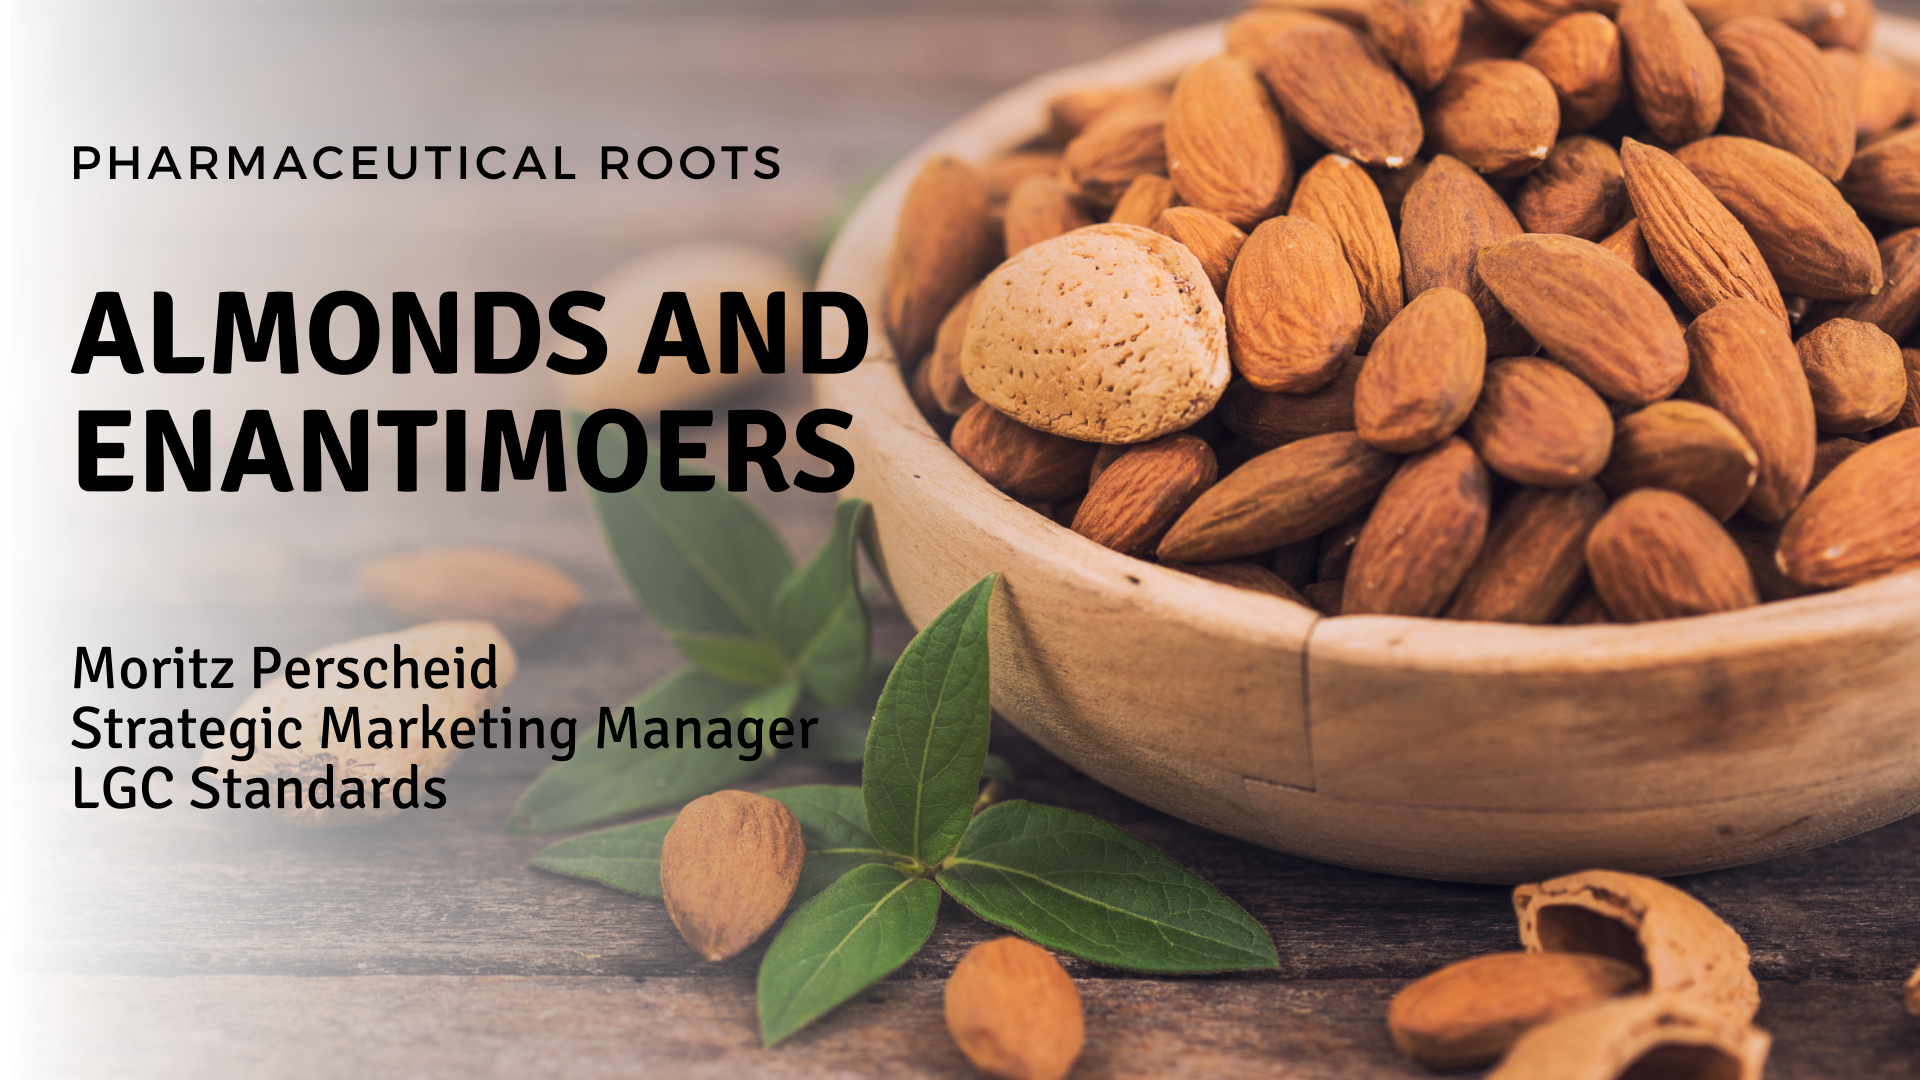 Almonds and Enantiomers